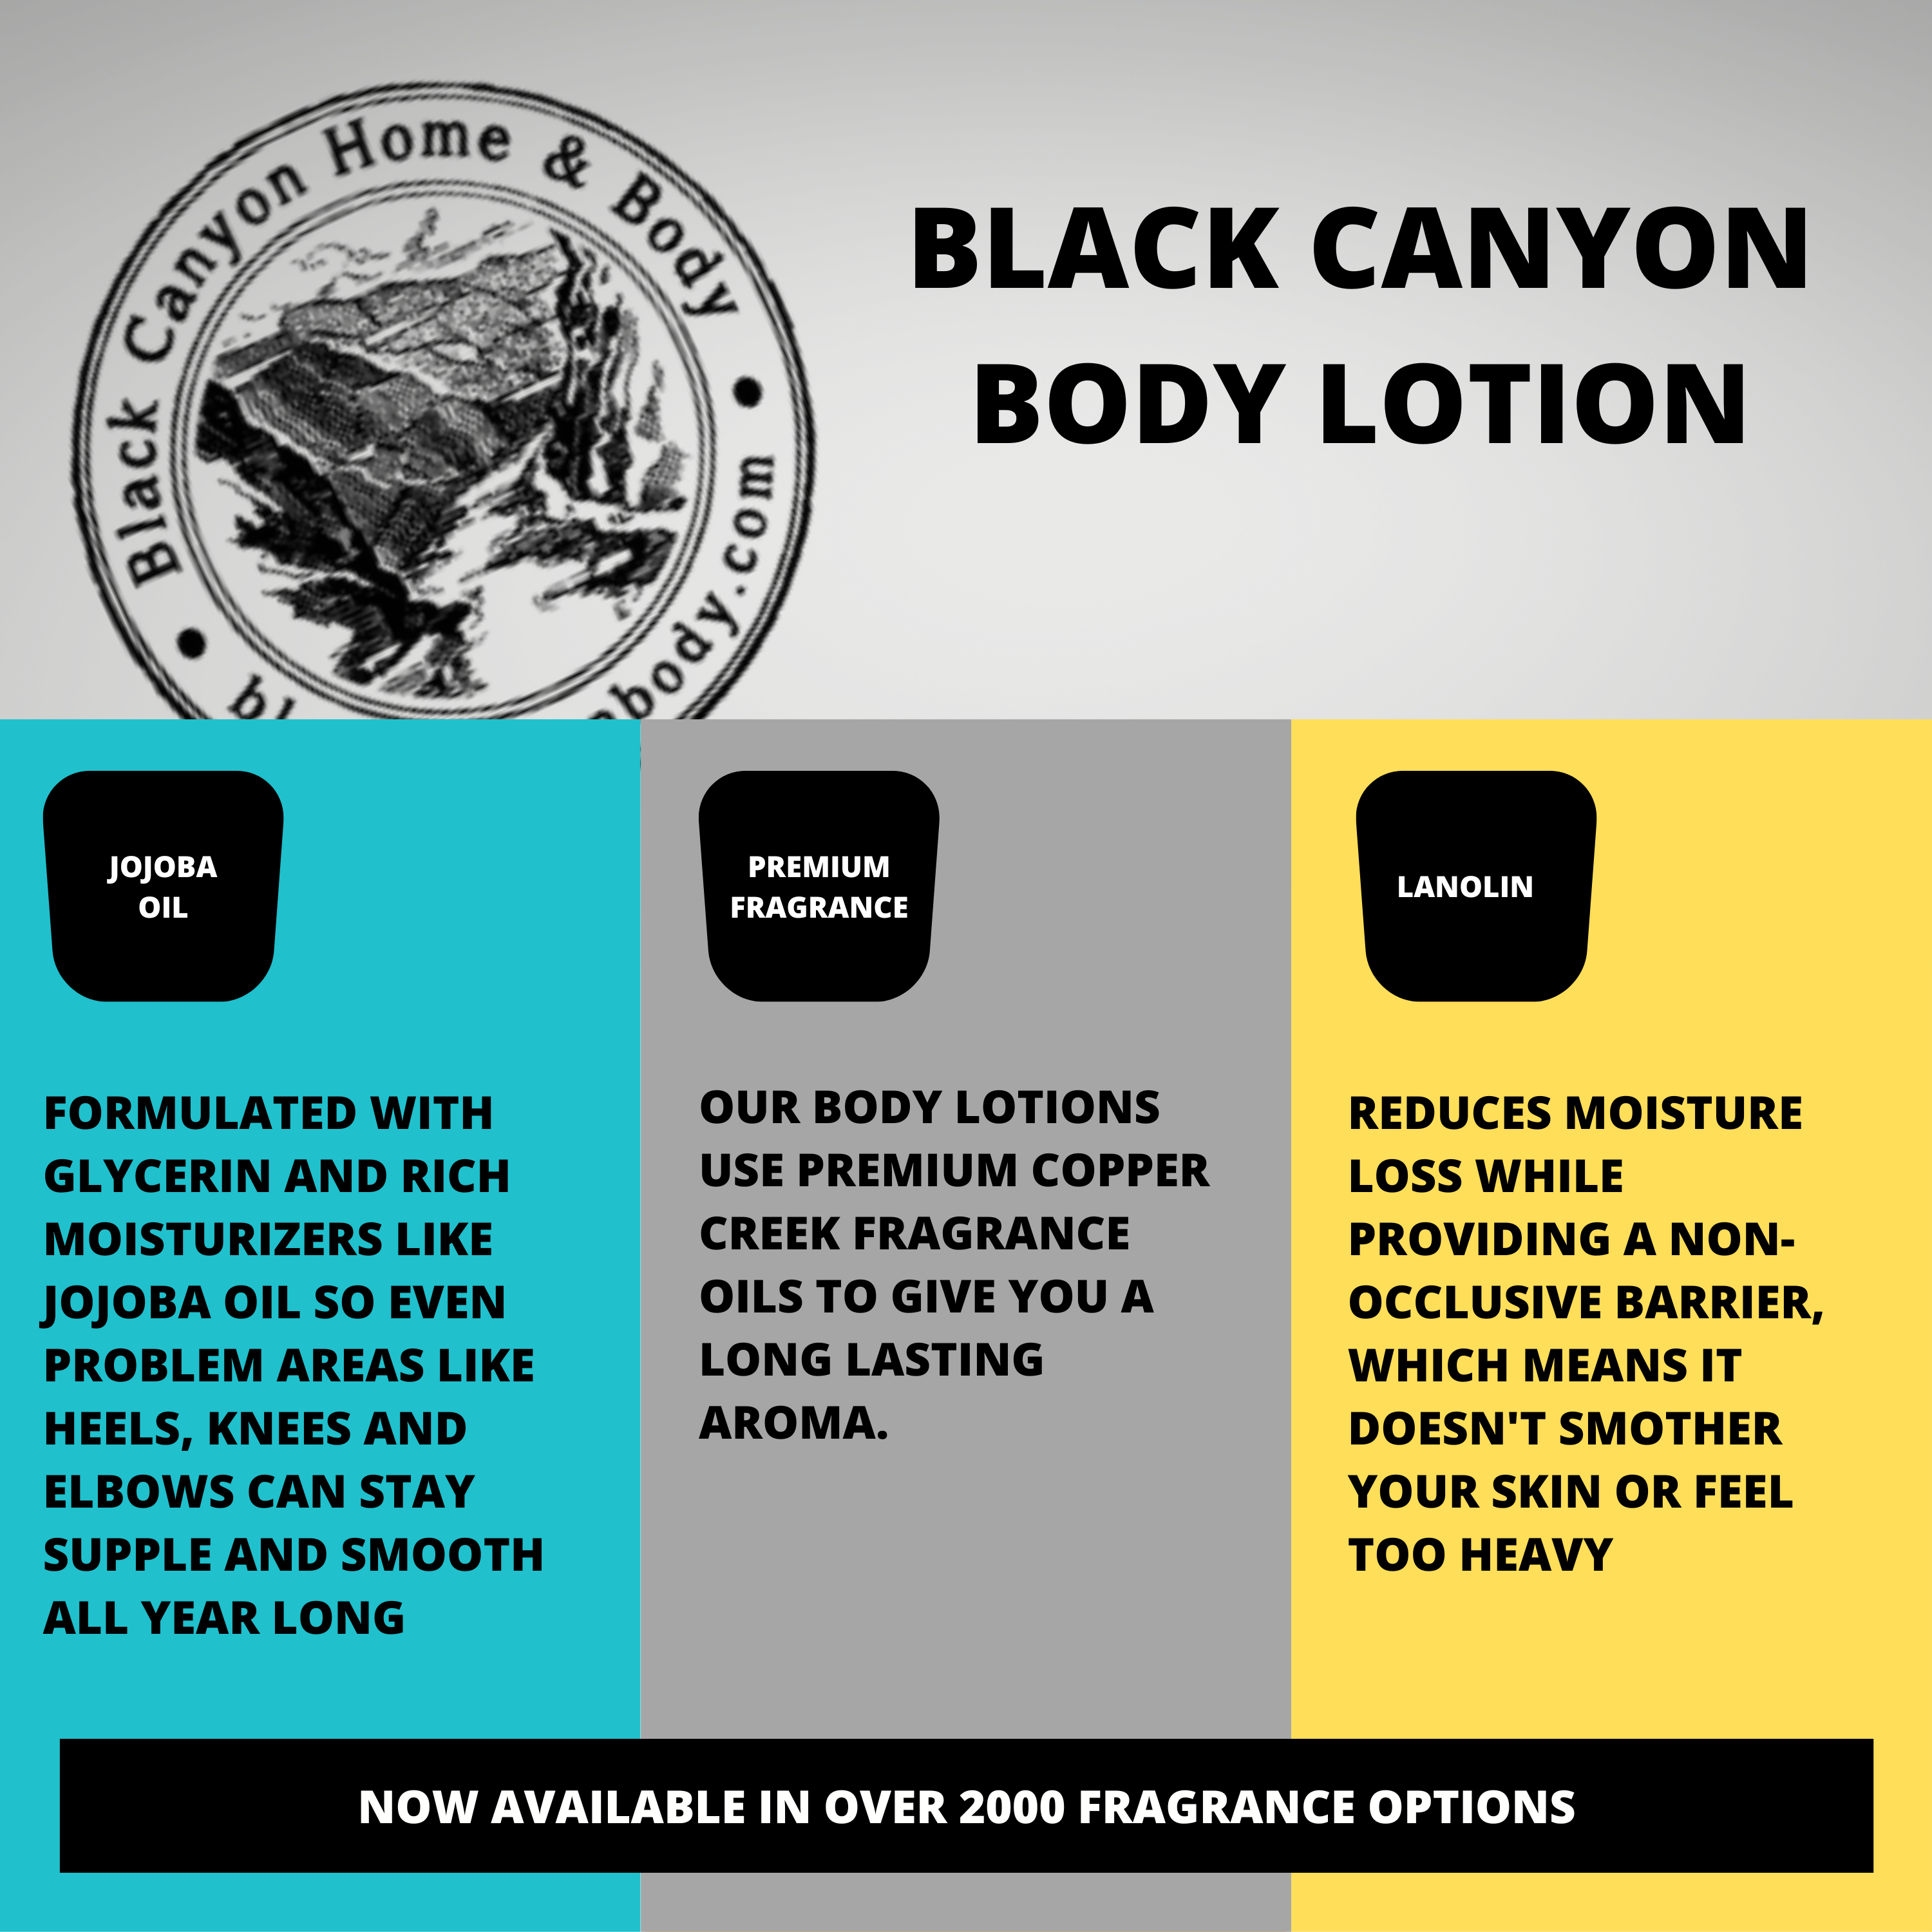 Paydens Cobalt Black Pepper Musk Scented Luxury Body Lotion with Lanolin and Jojoba Oil For Men